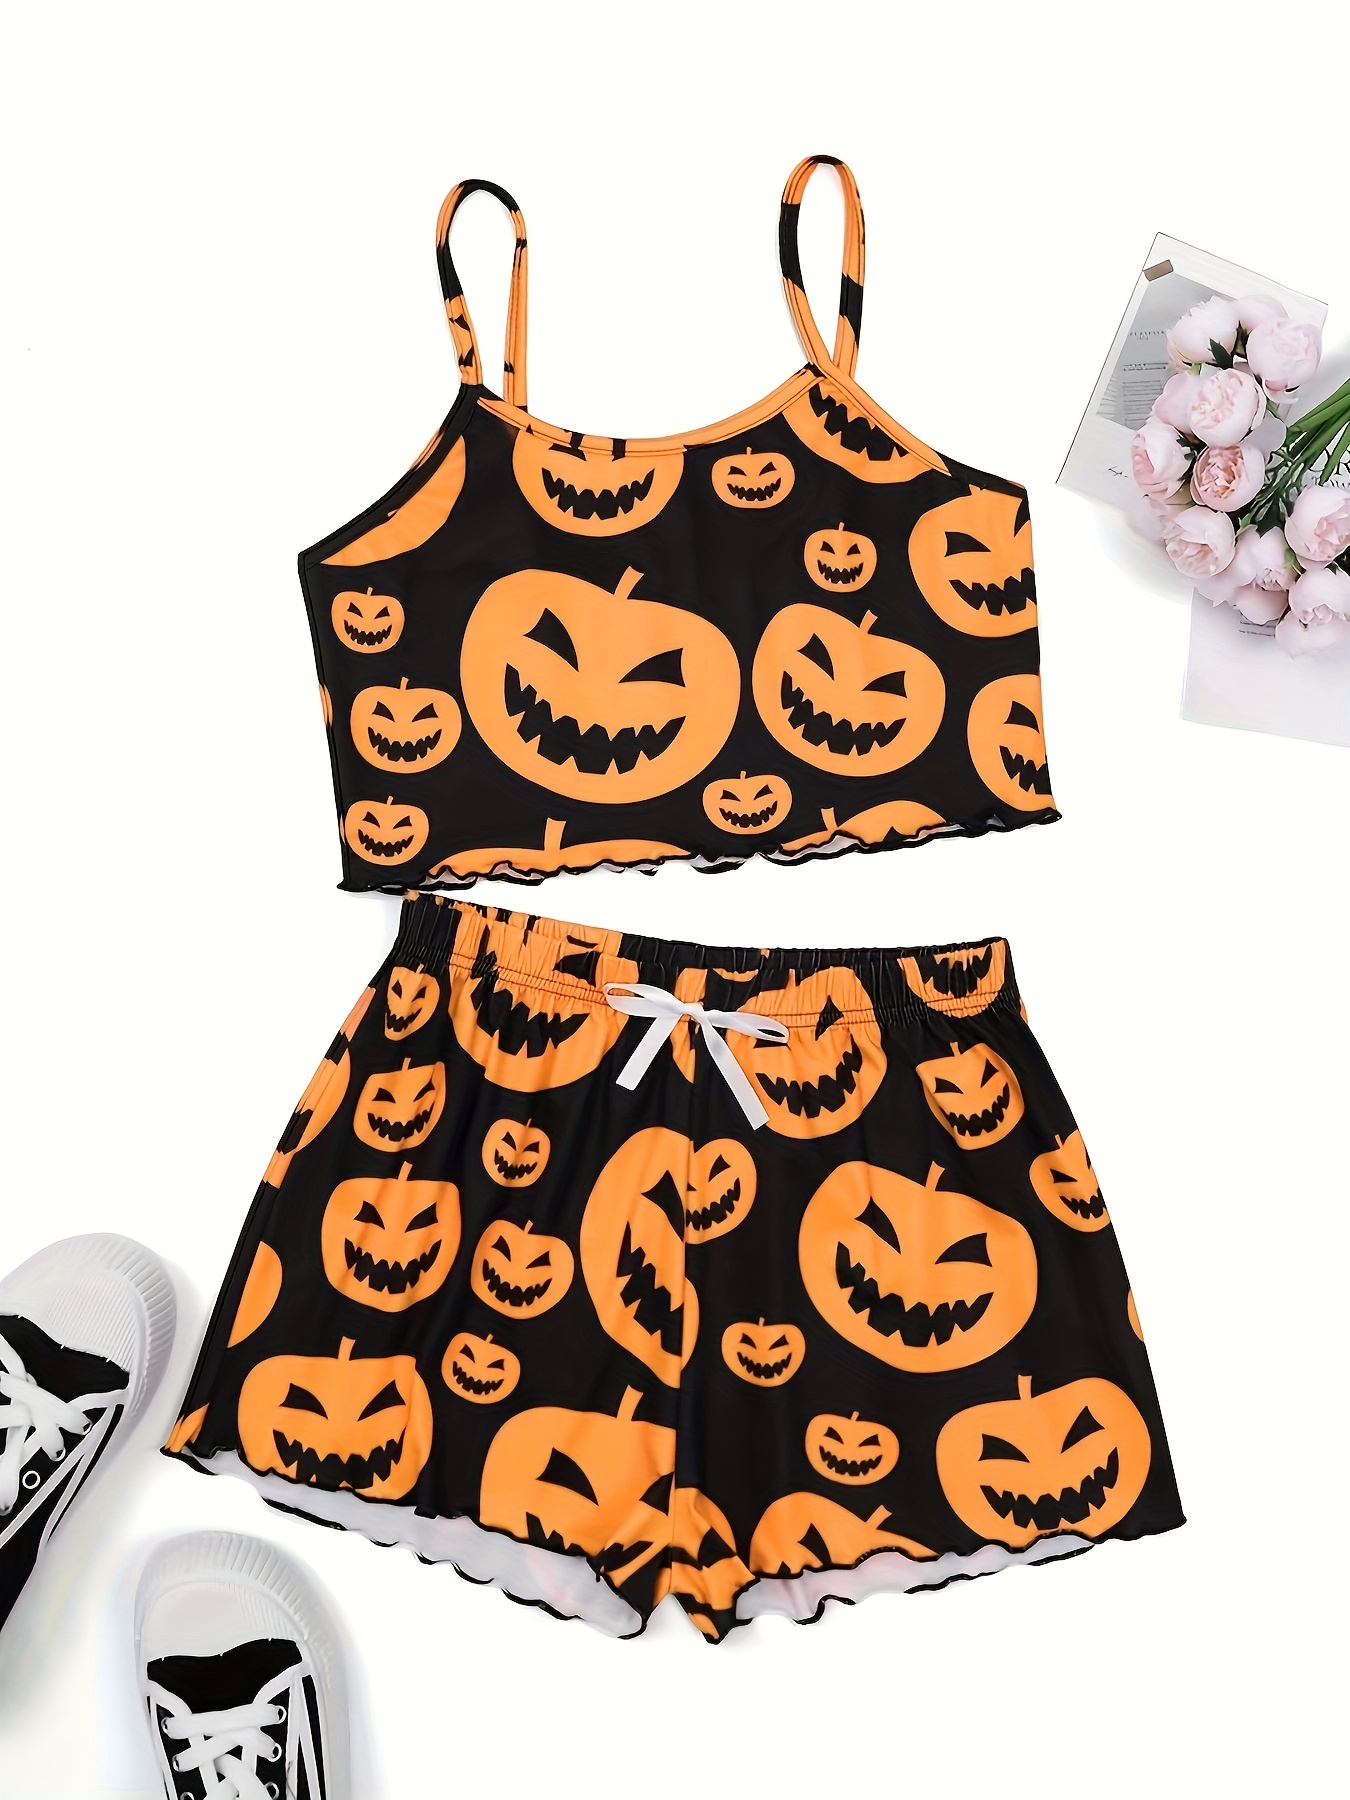 Halloween Skeleton Hand Tank And Shorts Pajama Set For Women Short Sleeve  Top And Short Short Mens Cool Sleep Short Set L230920 From Spider_hoodie,  $3.93